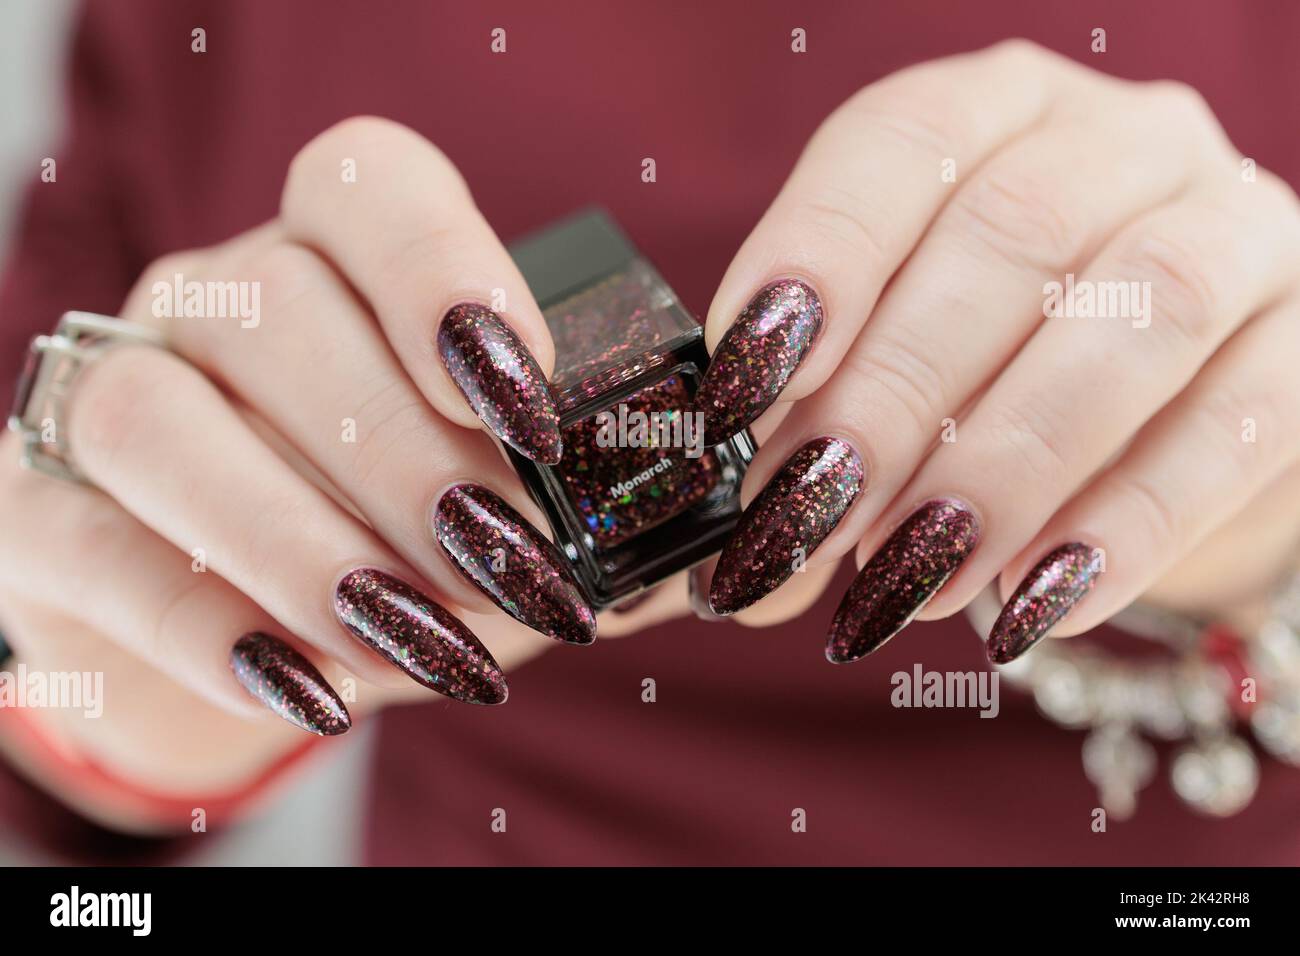 Woman Hand with Long Nails and a Bottle of Dark Red Nail Polish Stock Image  - Image of brand, acrylic: 268253391